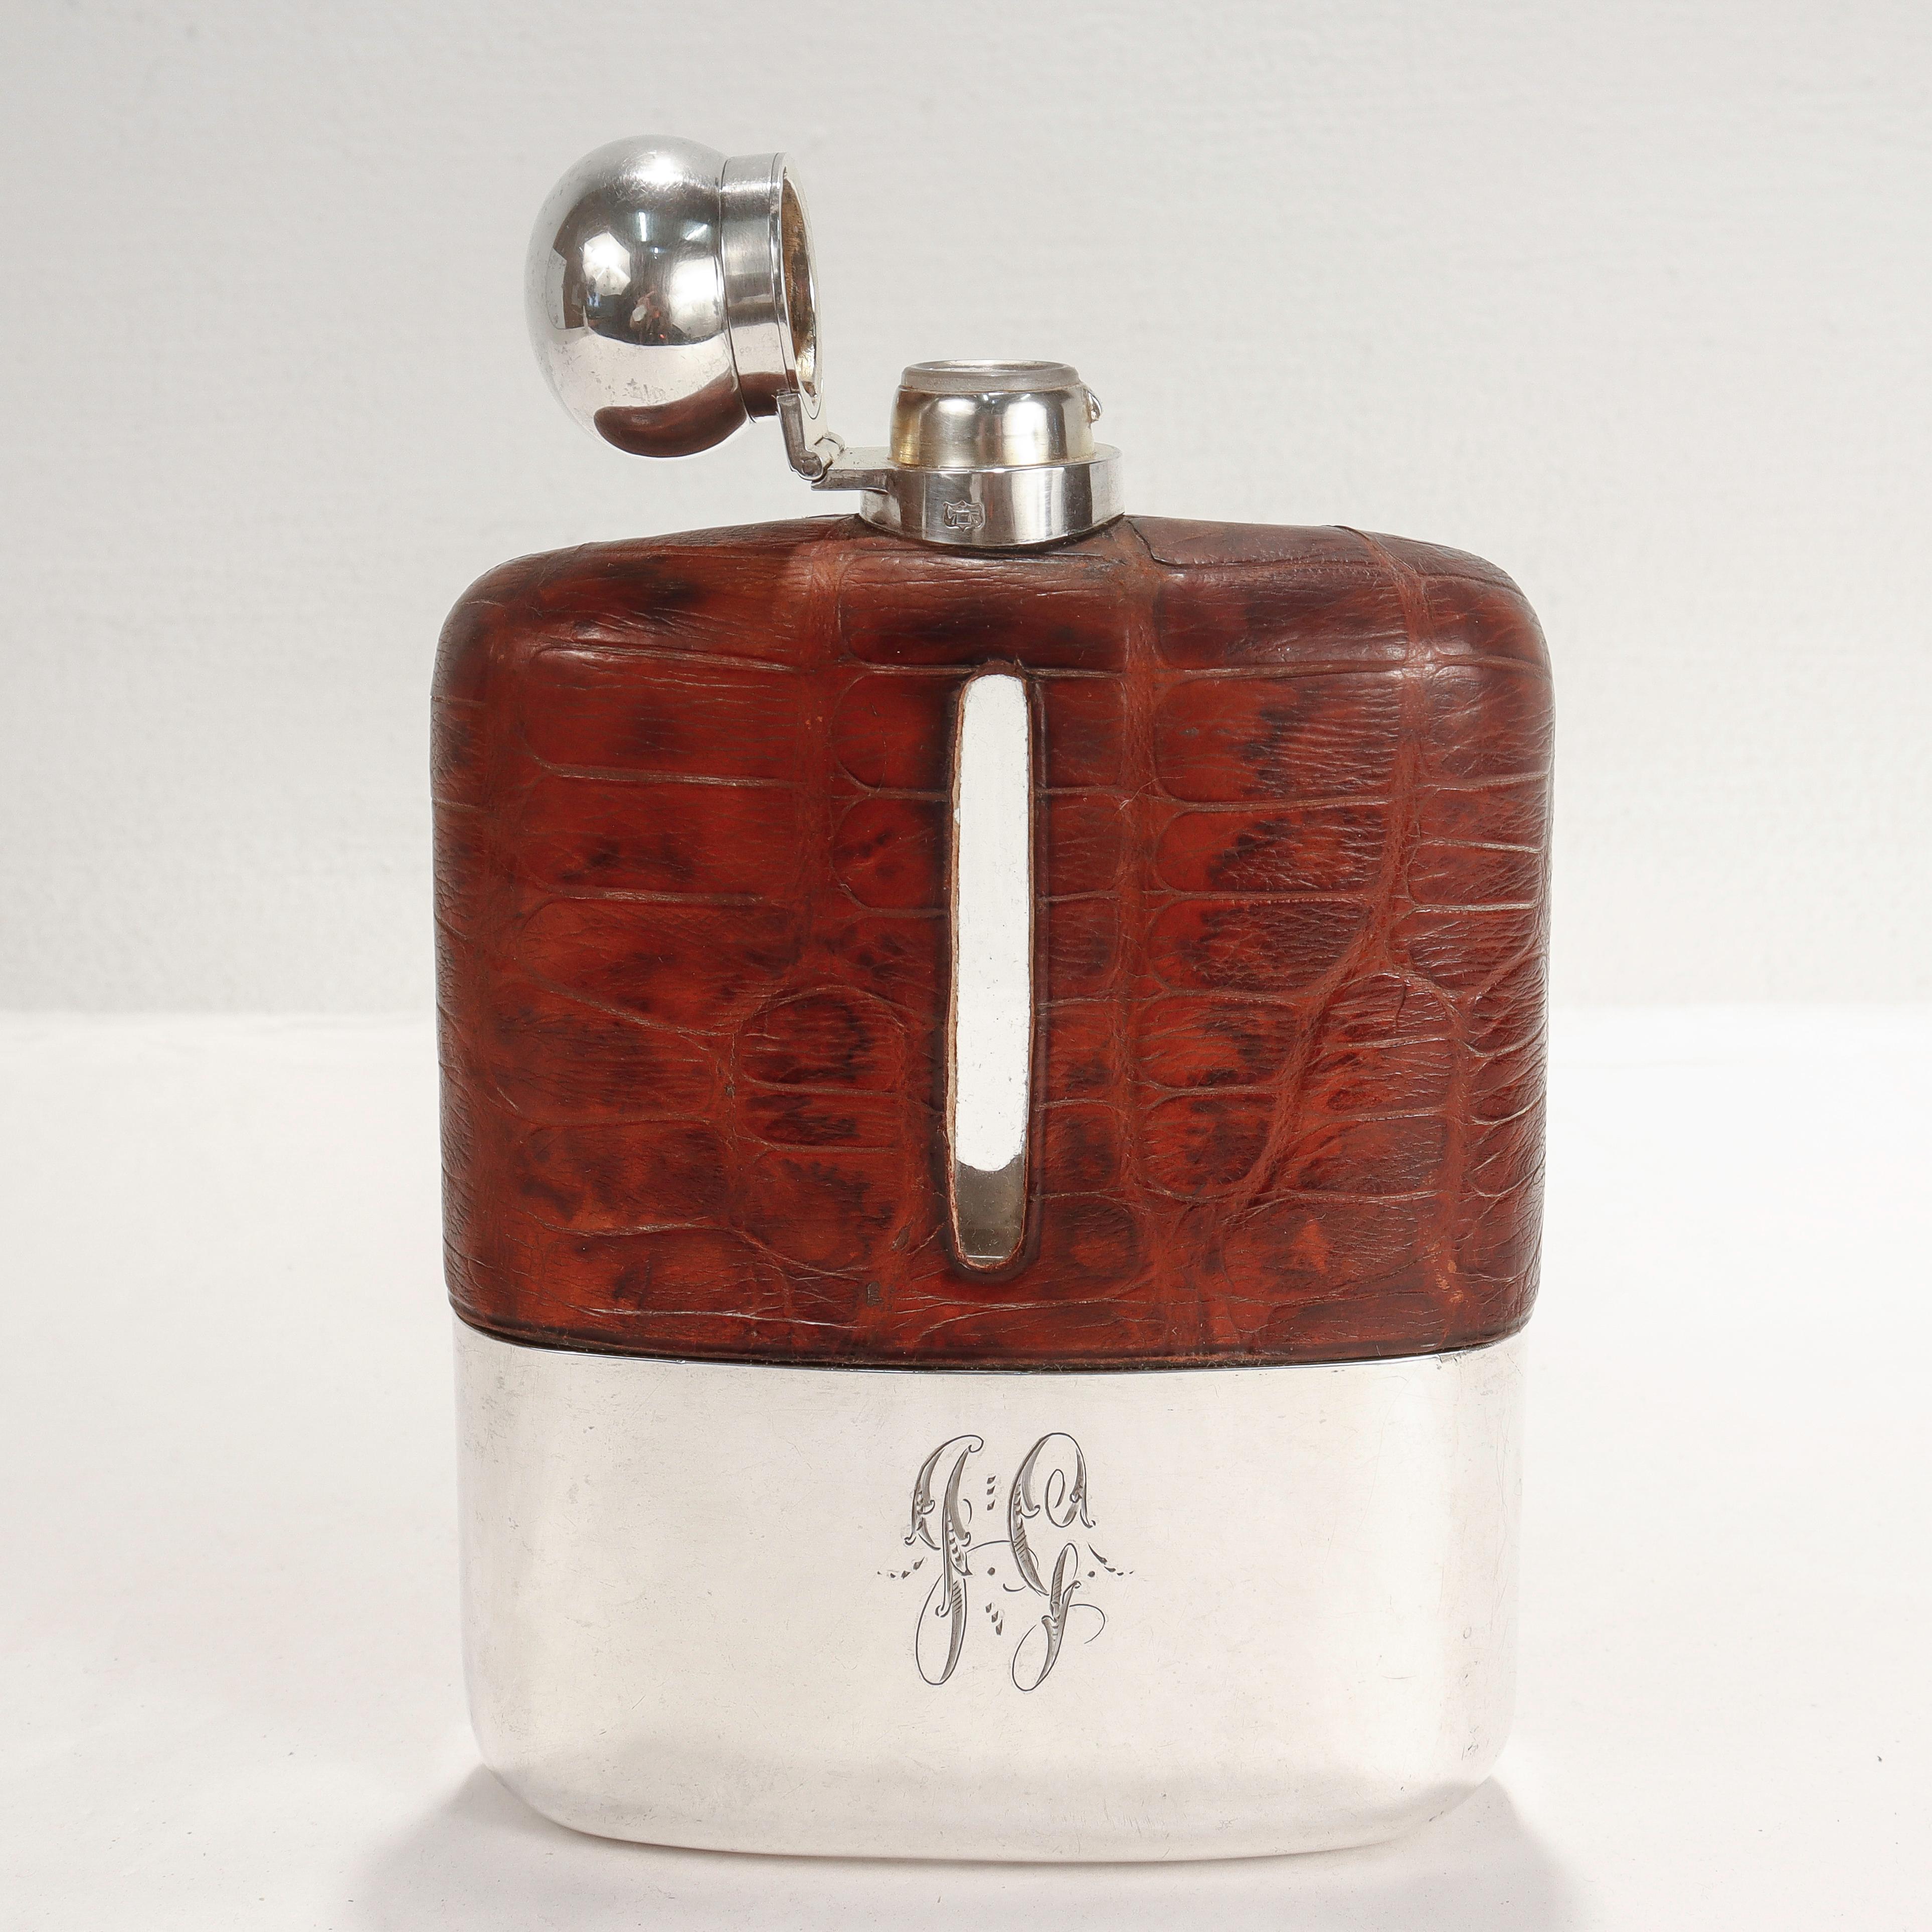 A smart Edwardian liquor or whiskey hip flask.

By James Dixon & Son. 

In silver plate, glass, and leather. 

With a removable silver plate cup to the base, twist top stopper to the top, and an embossed 'alligator' pattern leather cover to